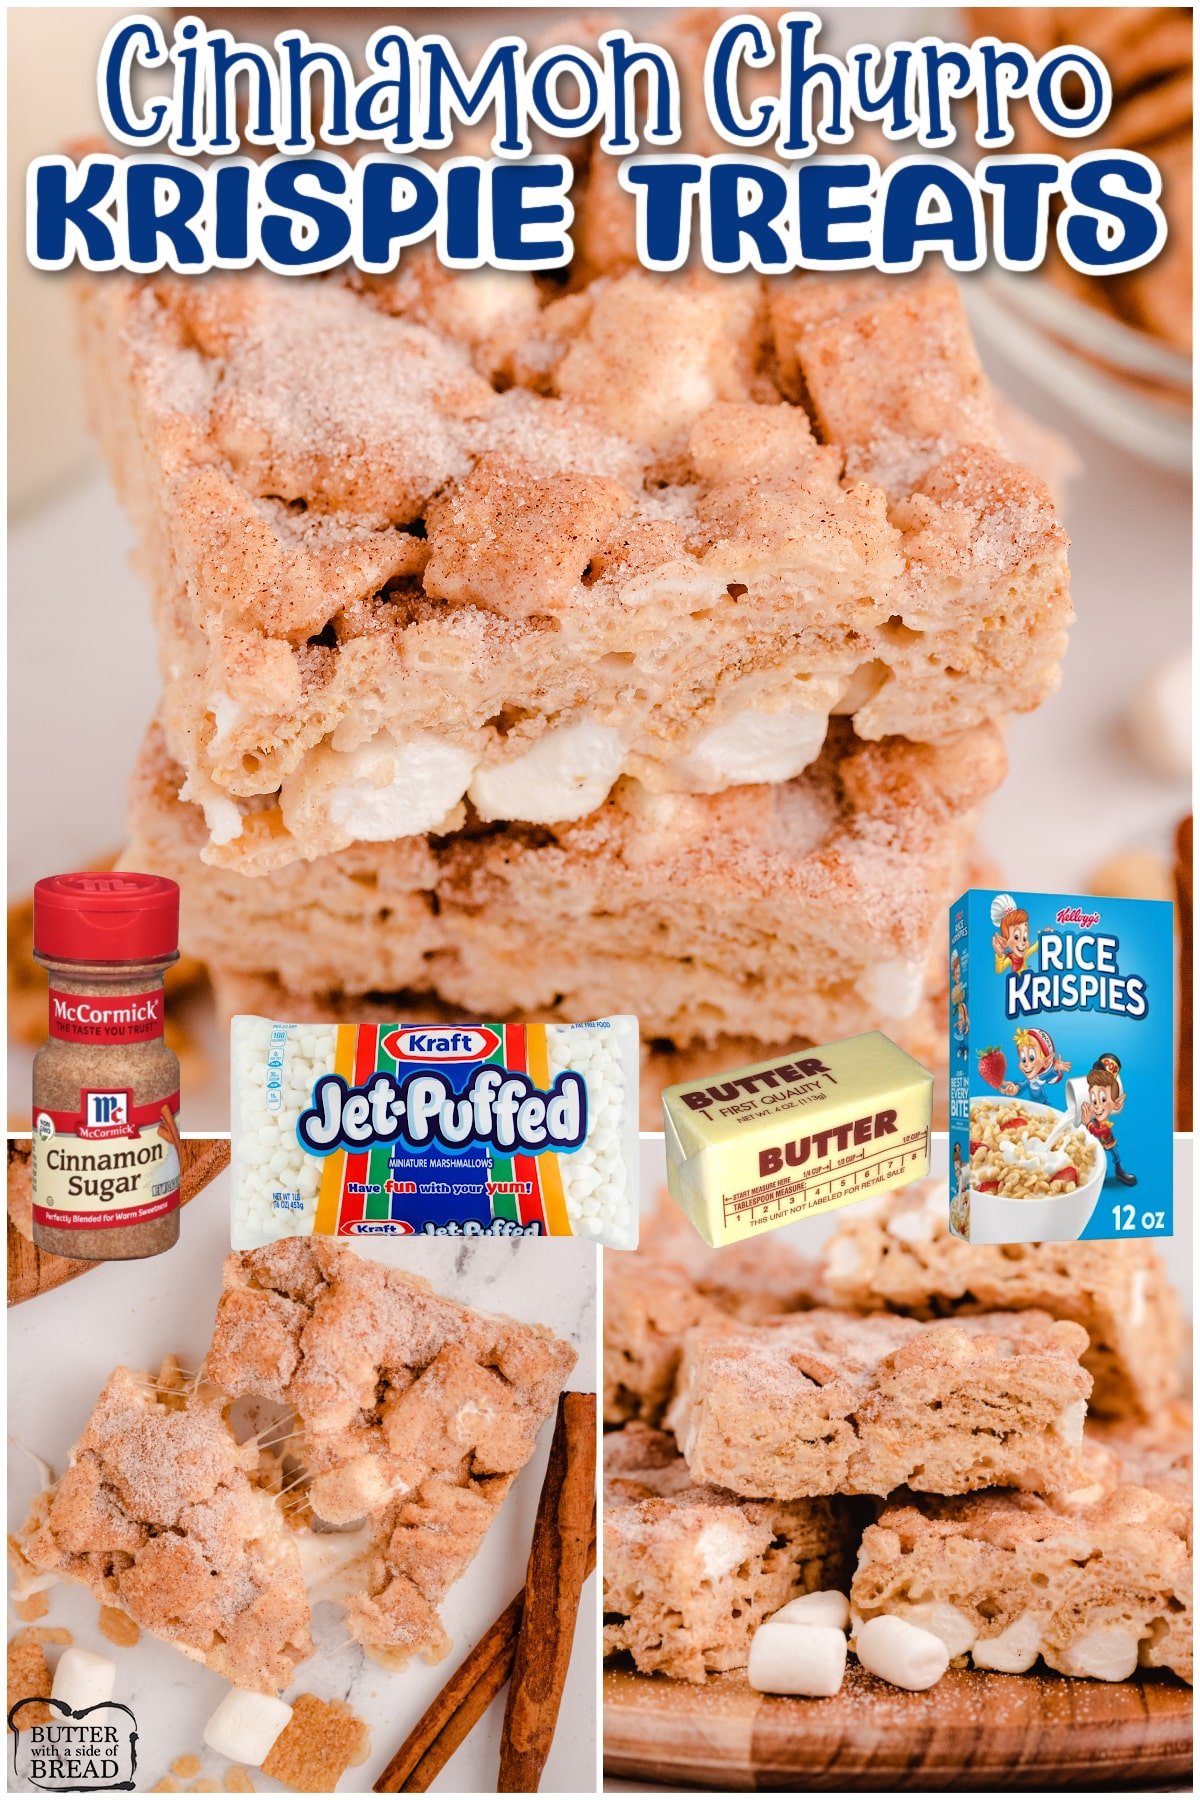 Churro Krispie Treats combine cinnamon sugar with gooey marshmallows & crispy cereal in a simple treat inspired by delicious churros!